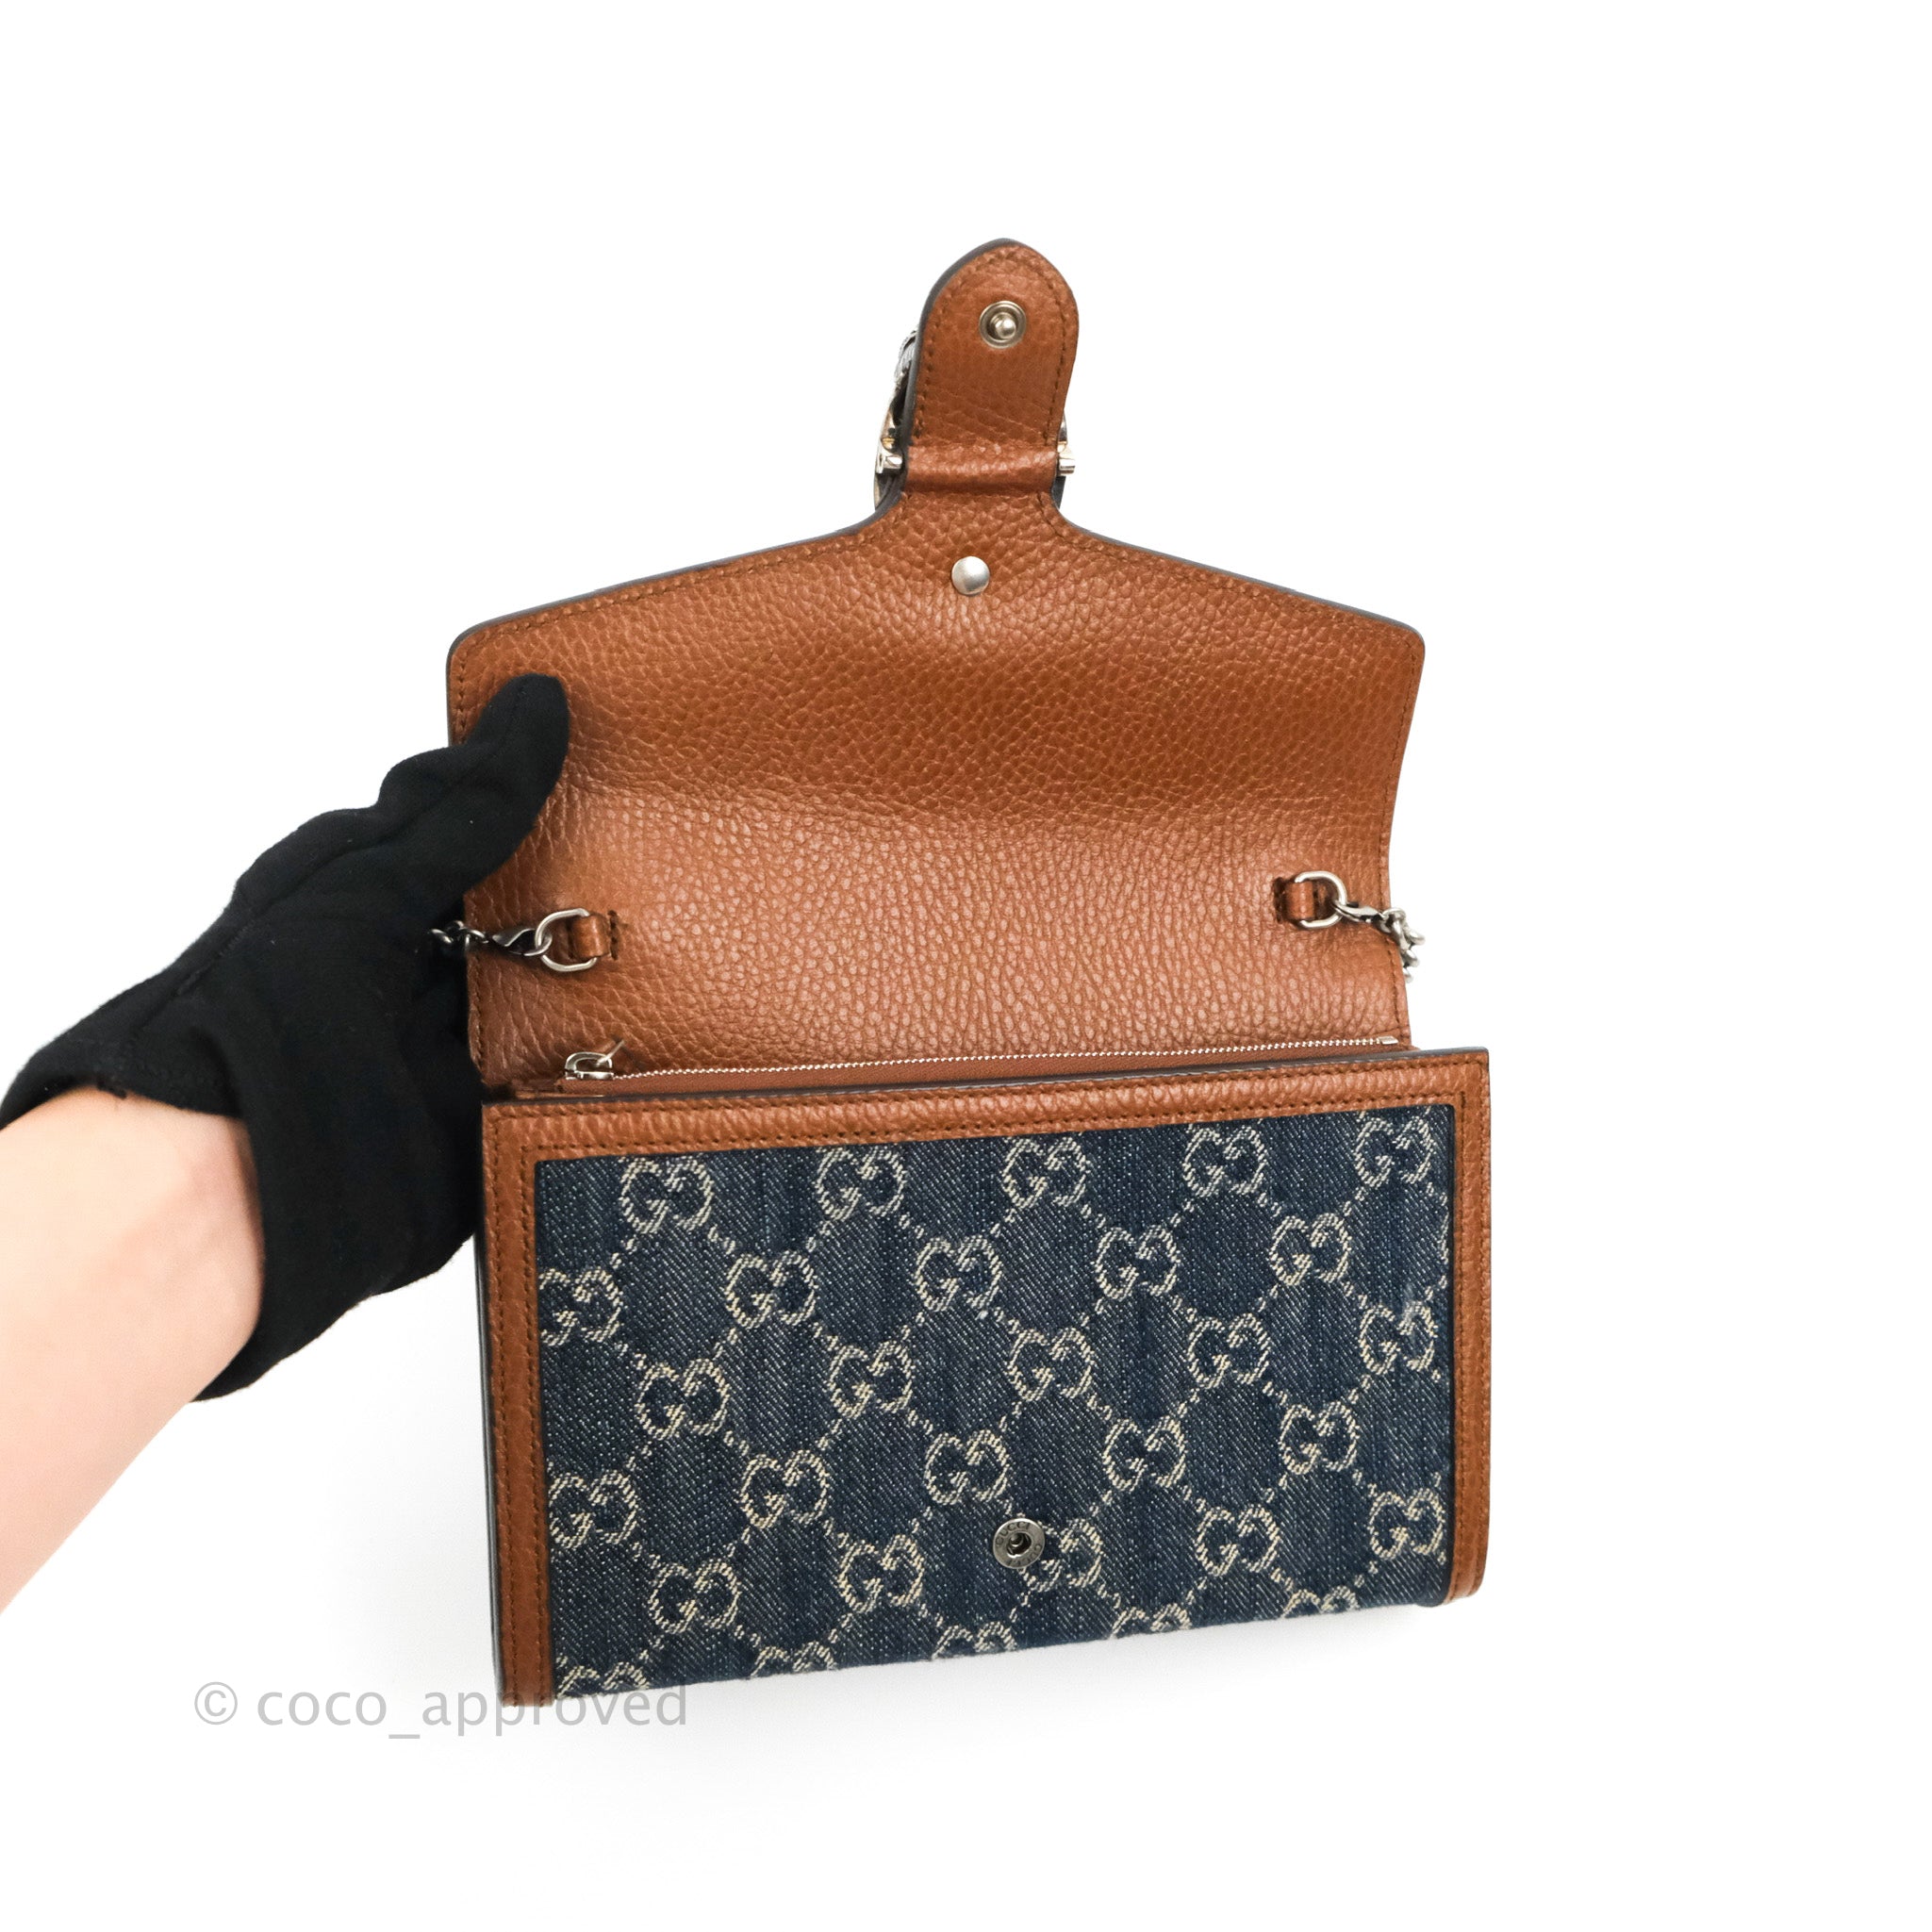 Sold at Auction: GUCCI AND LOUIS VUITTON. 1) BLUE LEATHER GUCCI